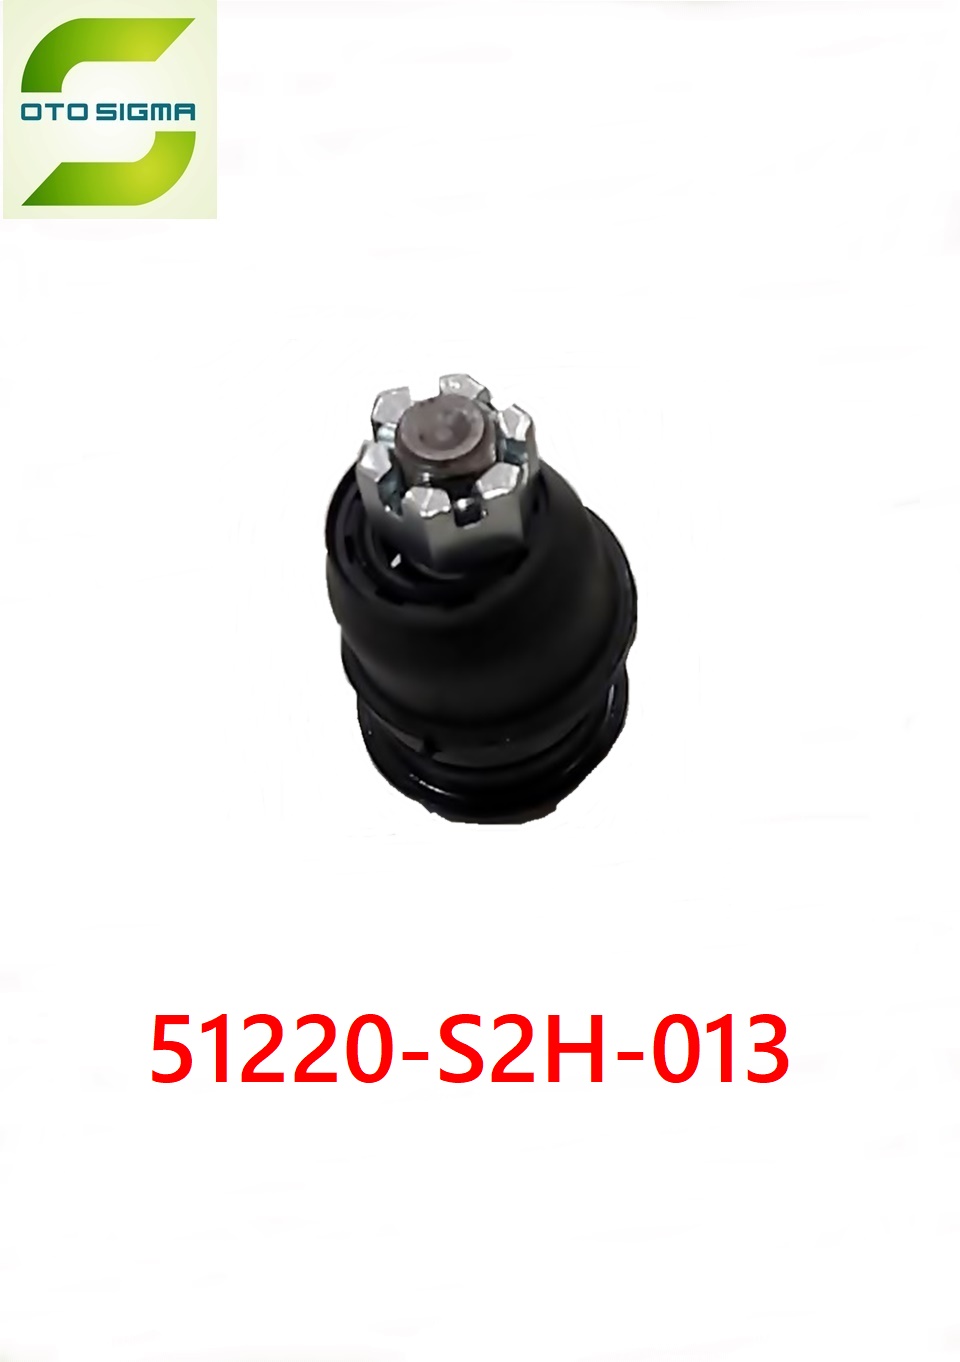 HONDA Ball joint Auto parts ball joint factory spare parts 51220-S2H-013-51220-S2H-013